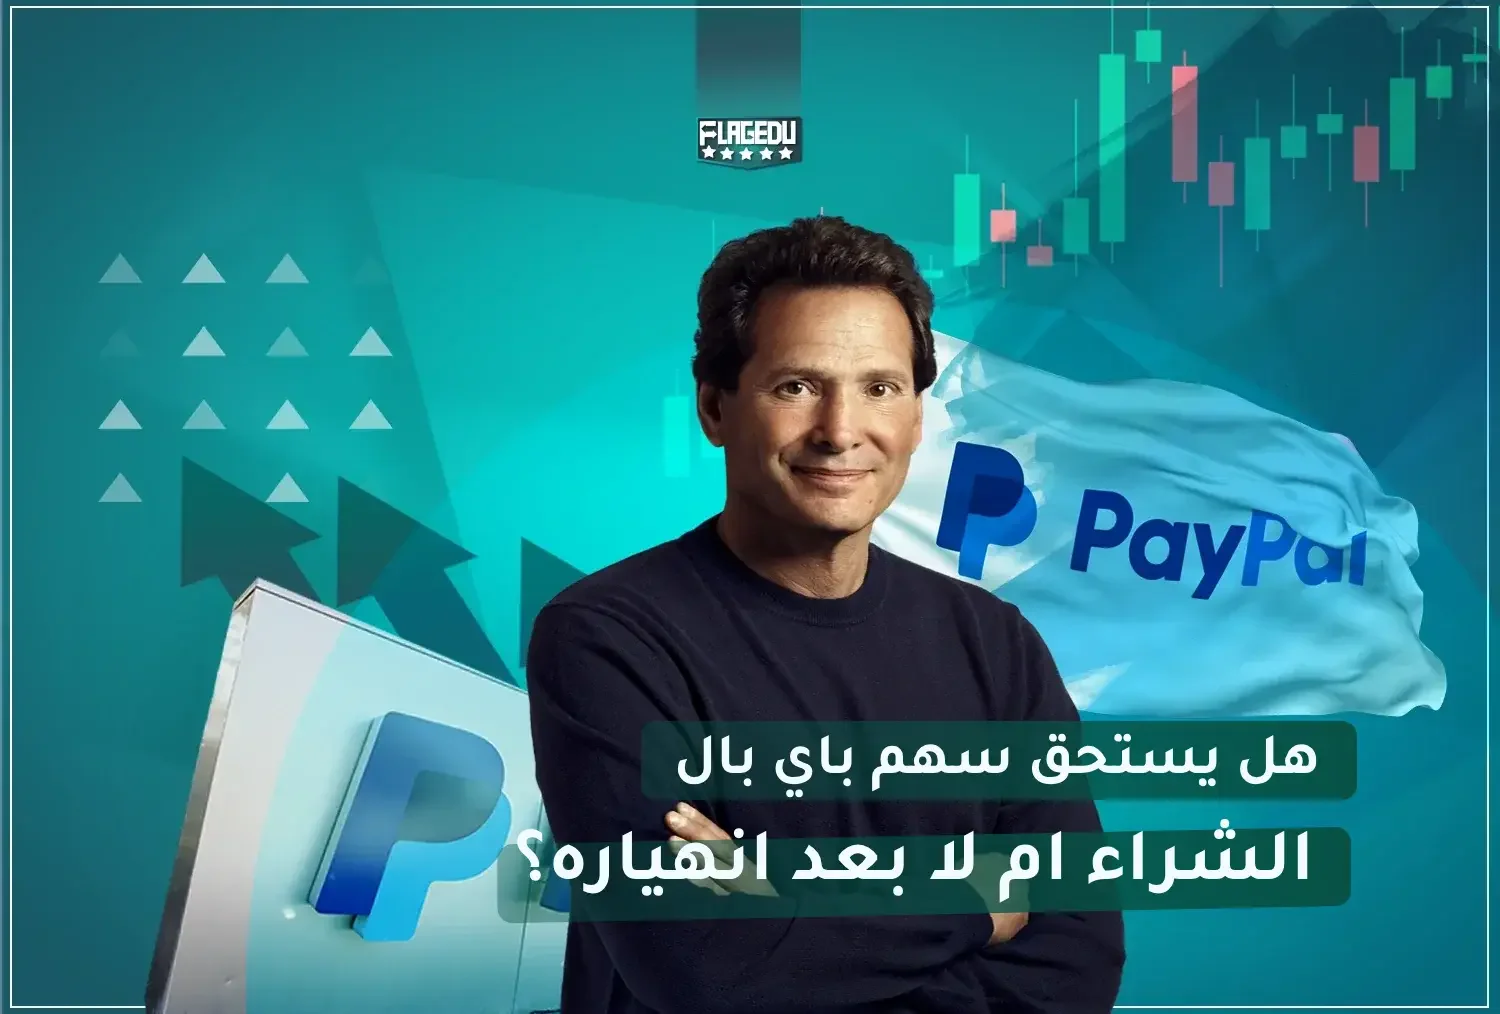 Is PayPal stock worth buying or not after its collapse?